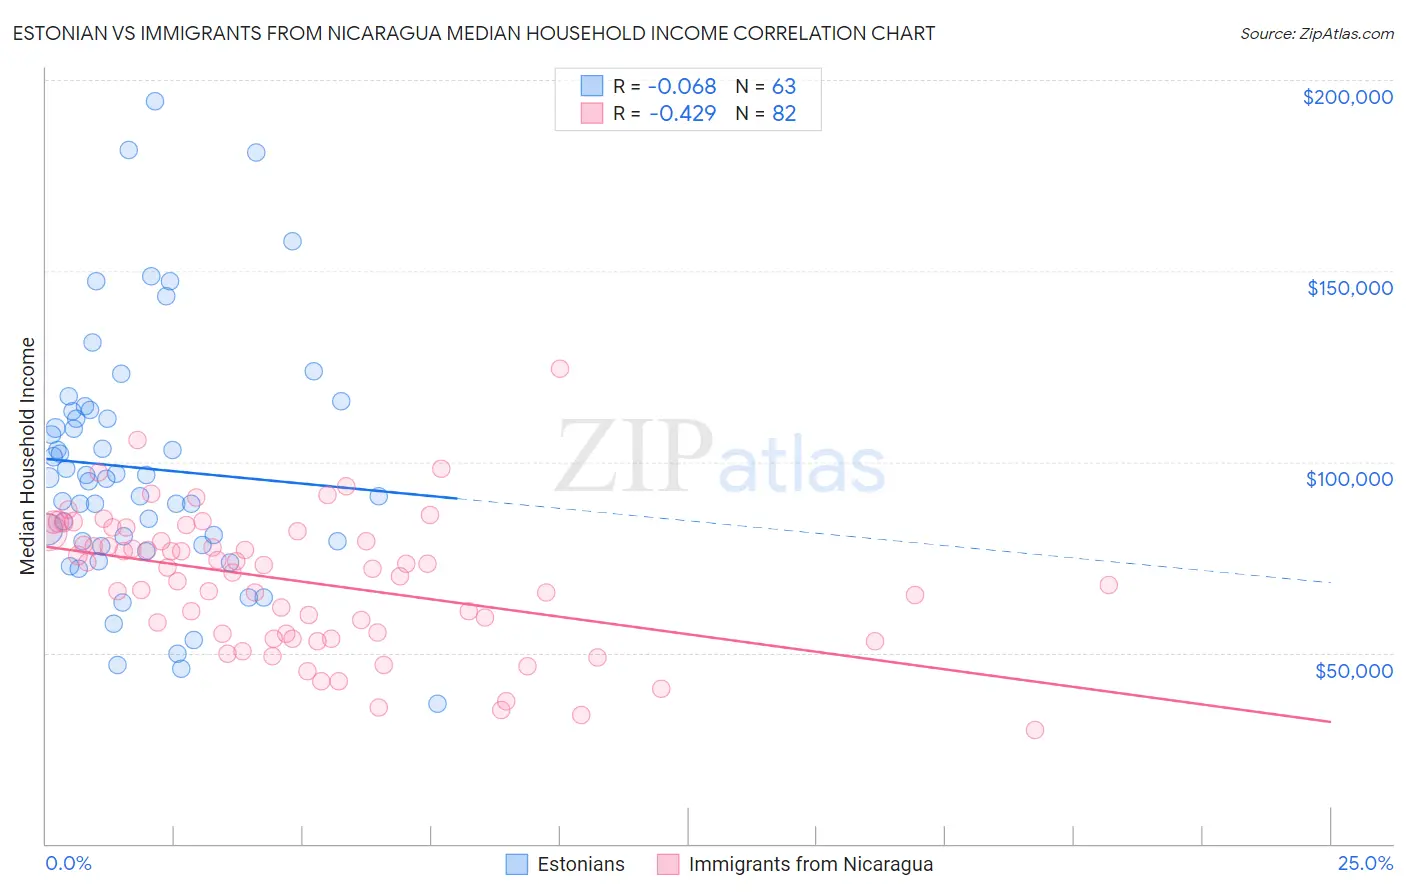 Estonian vs Immigrants from Nicaragua Median Household Income